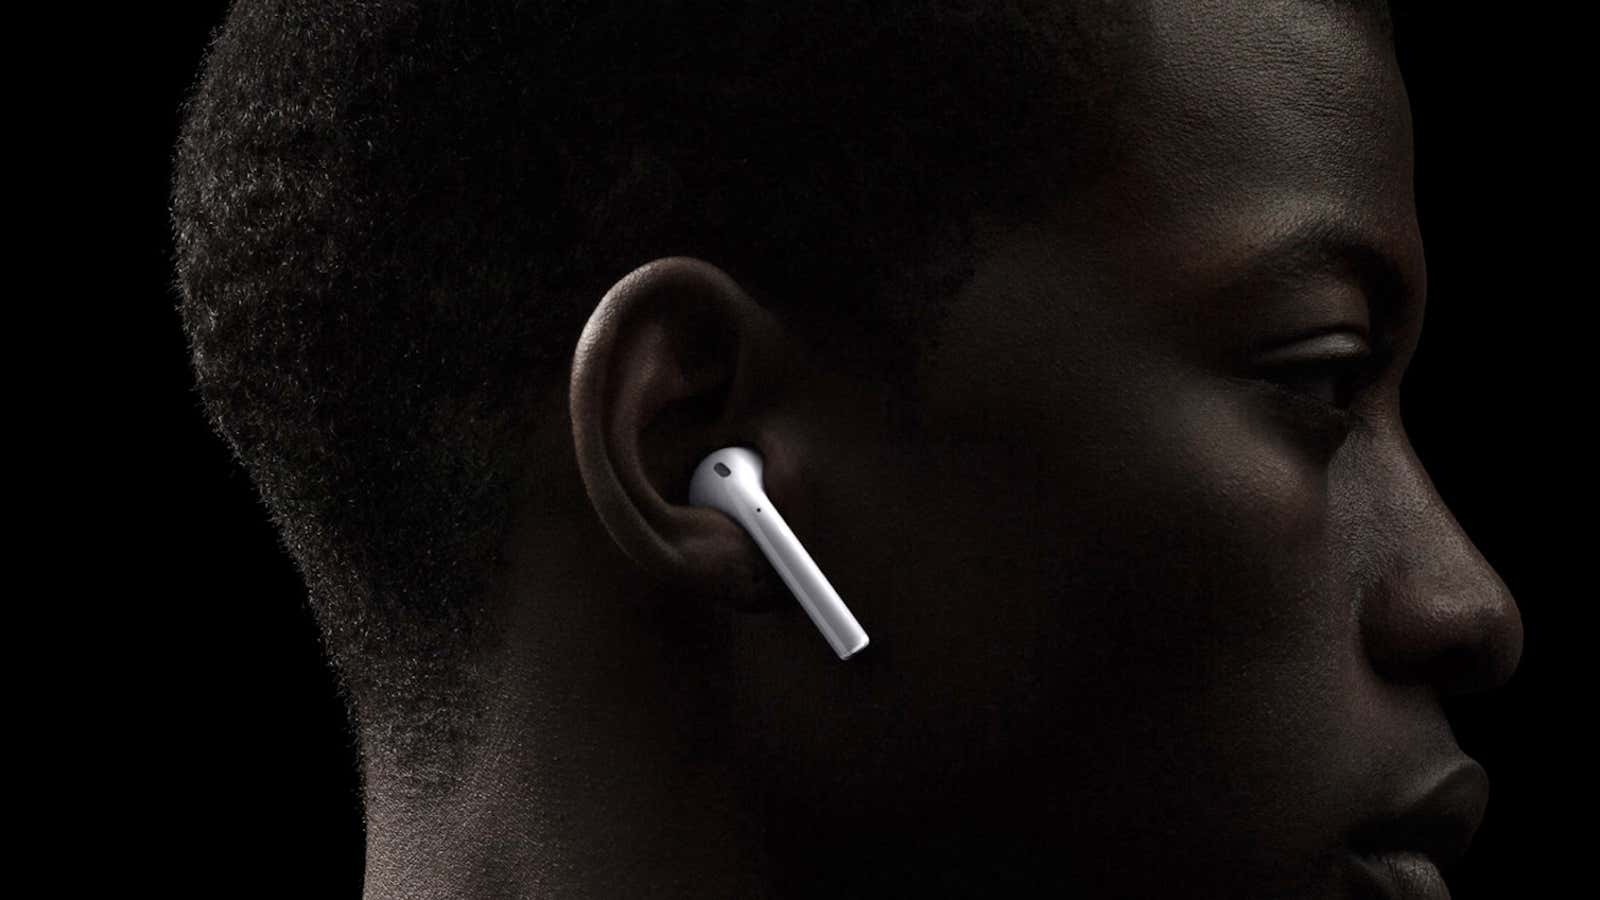 Why did Airpods succeed but Google Glass failed?